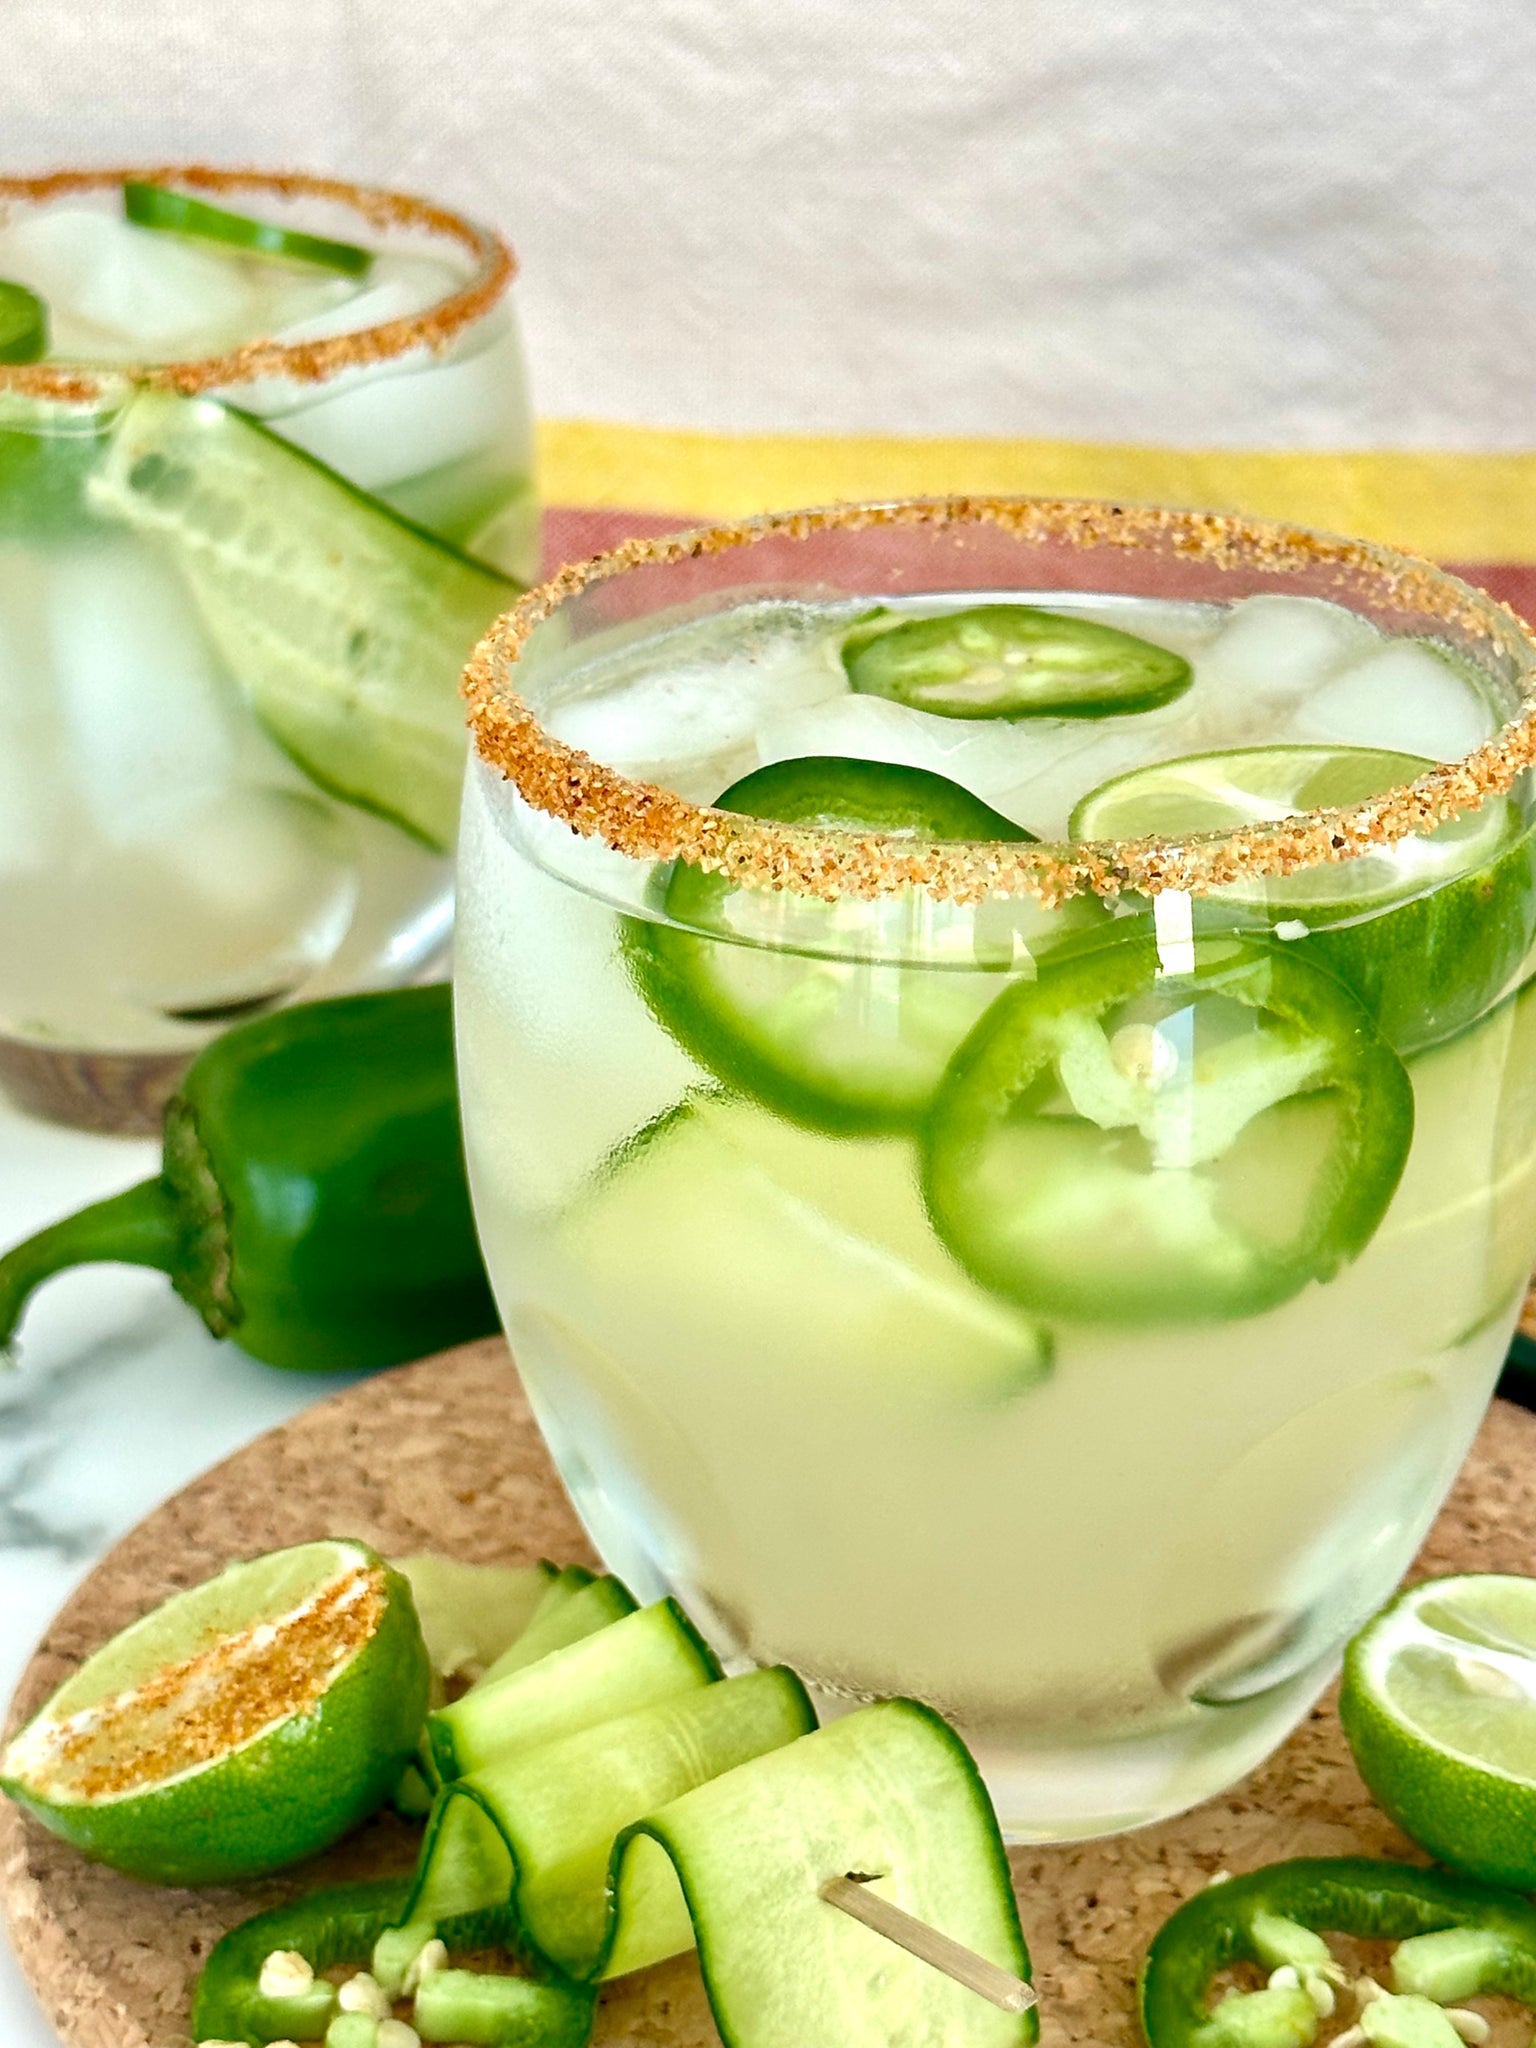 Spicy Cucumber & Jalapeno Margarita with a Dusted Rim